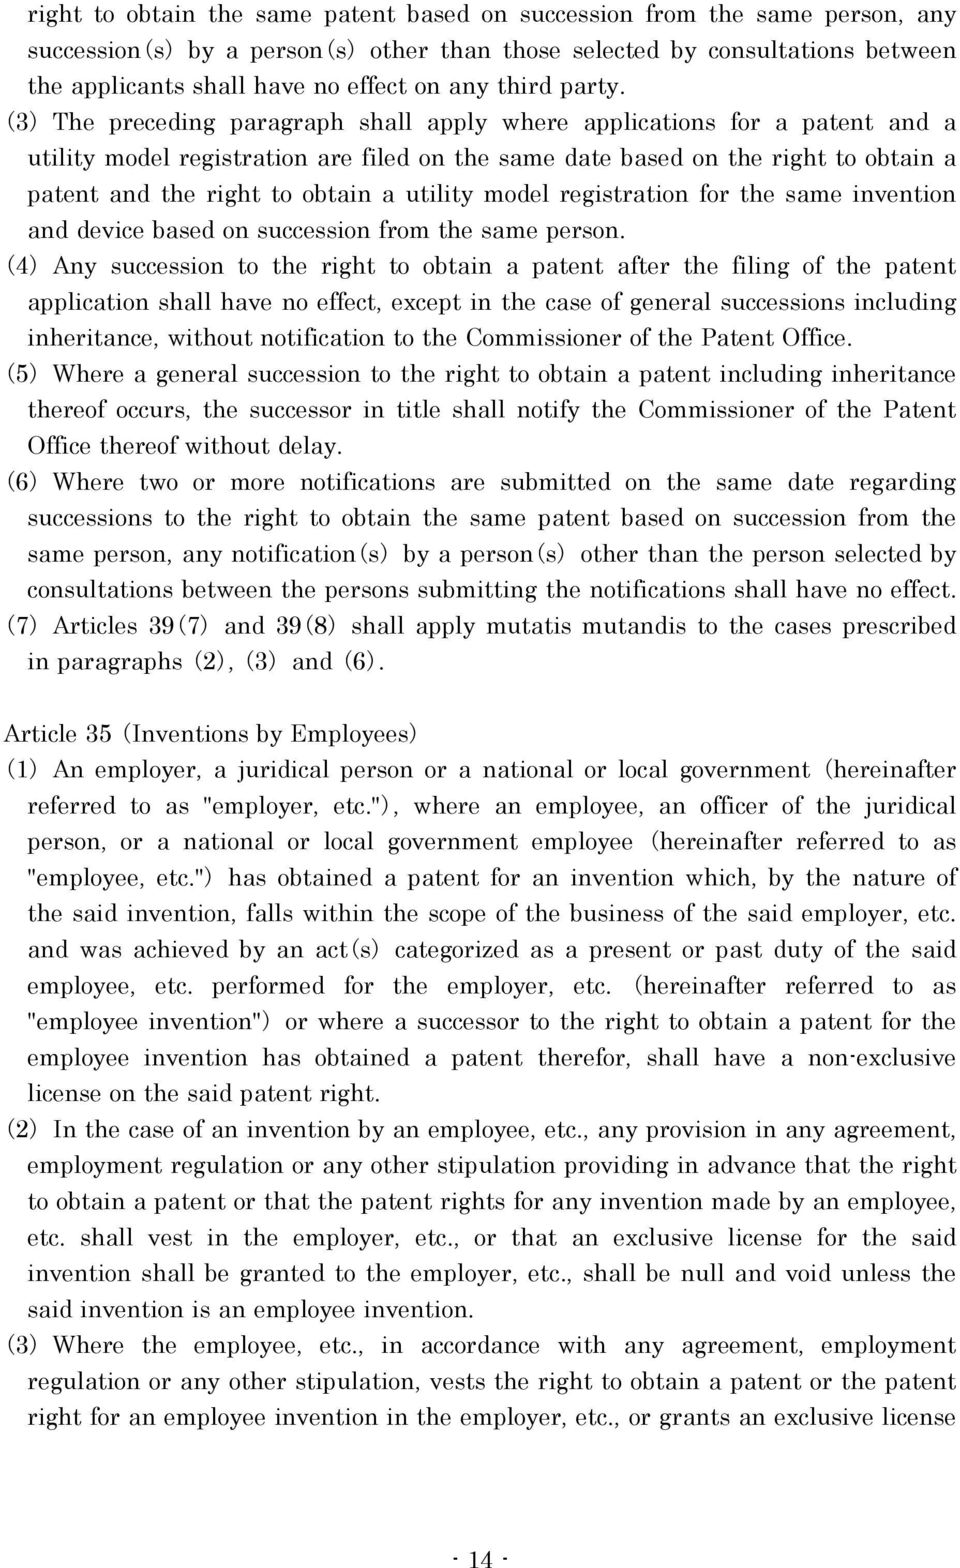 The preceding paragraph shall apply where applications for a patent and a utility model registration are filed on the same date based on the right to obtain a patent and the right to obtain a utility